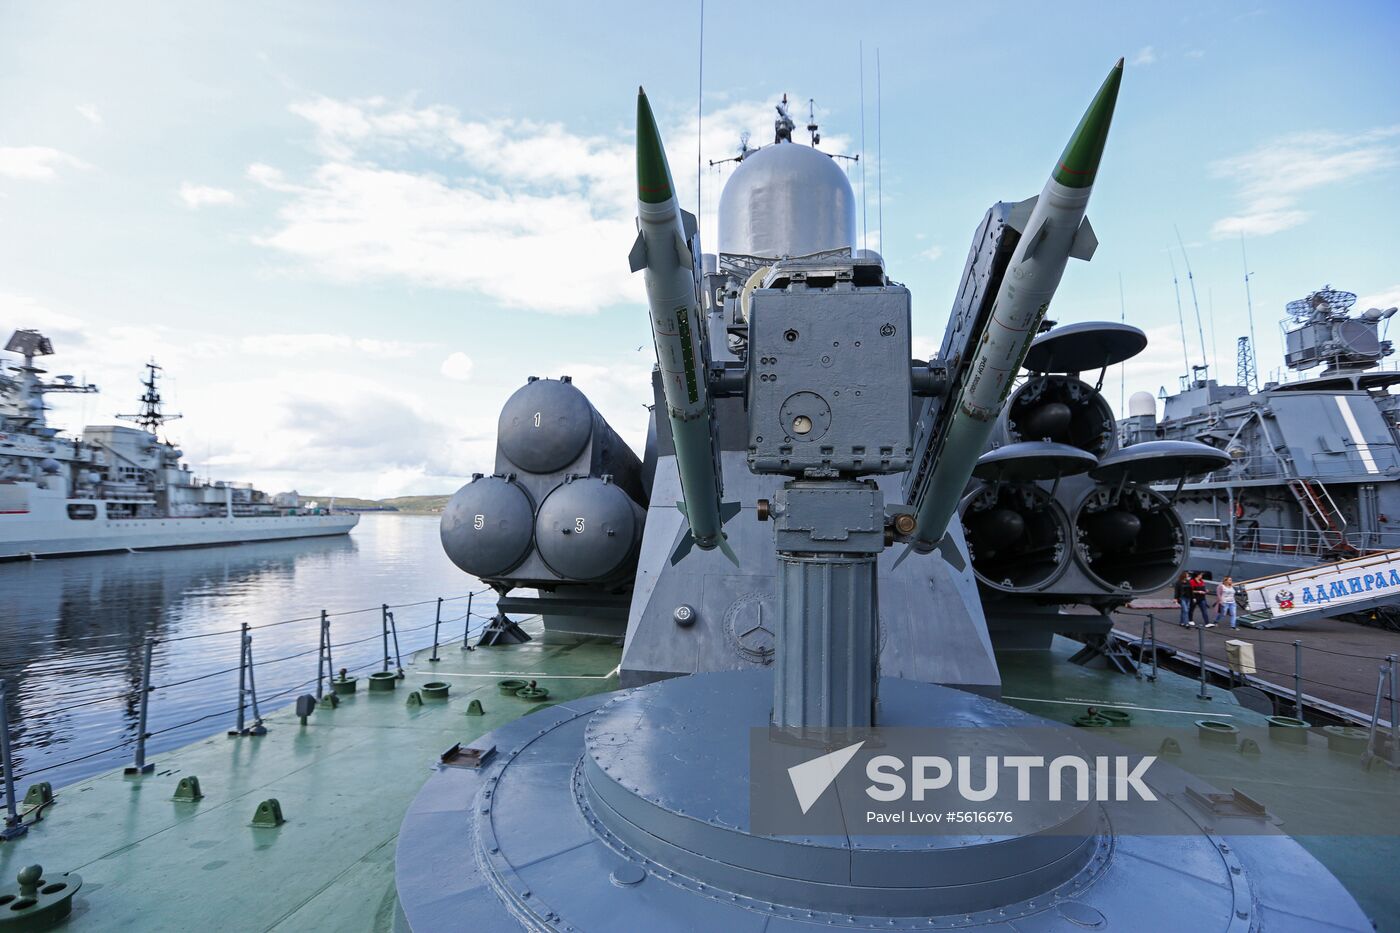 Expo and demo grounds unveiled in Severomorsk at Army 2018 forum